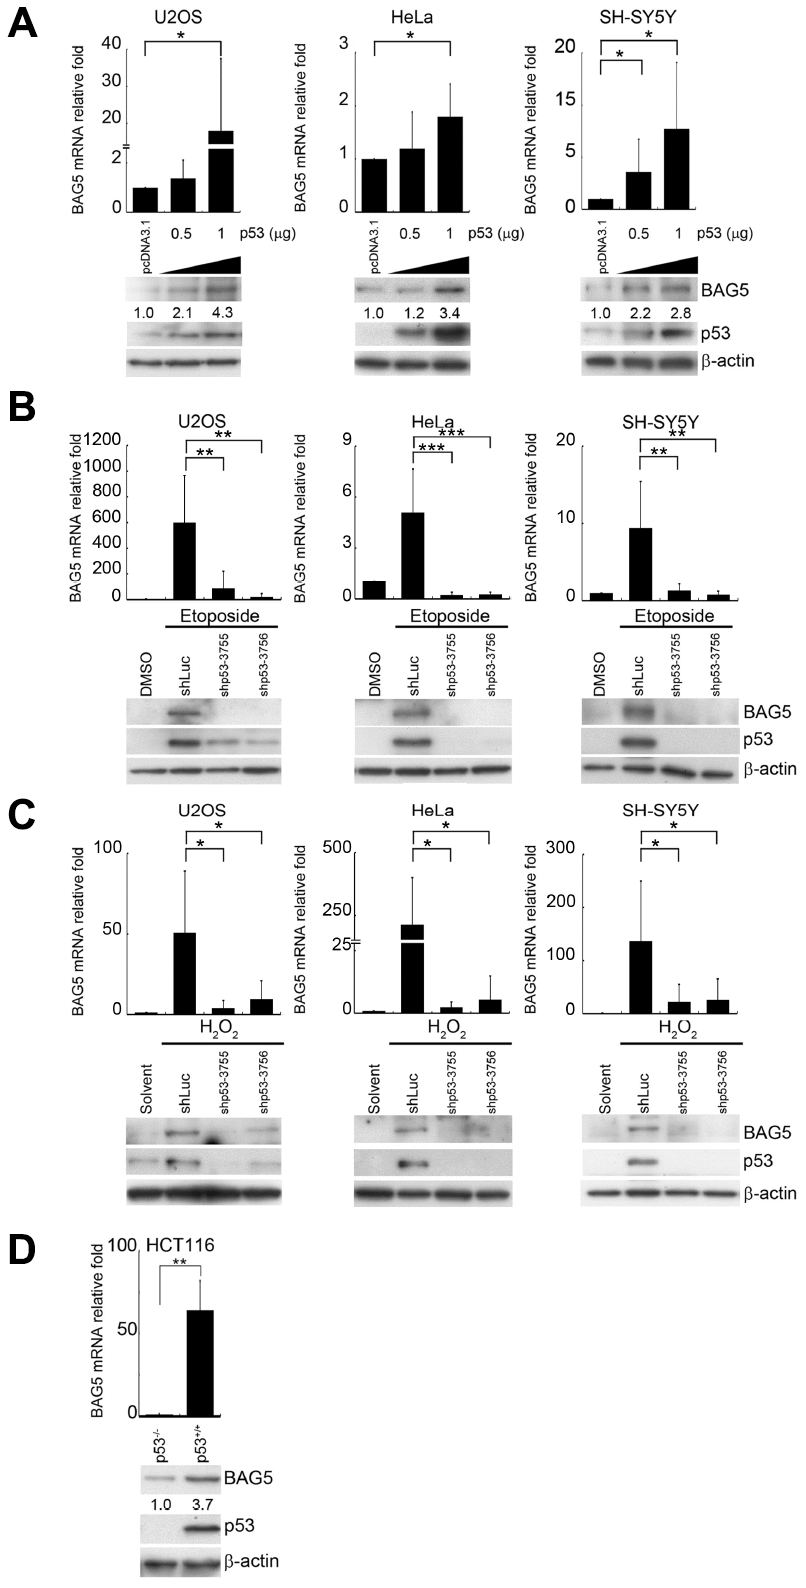 p53 is responsible for BAG5 induction. (A) U2OS, HeLa, and SH-SY5Y cells were transfected with various amounts of a p53-expressing plasmid (pcDNA3.1-p53). Expression levels of p53 and BAG5 were detected by Western blotting. β-Actin served as a loading control. After 24 or 48 h of pretreatment with etoposide (10 μM) or H2O2 (250 μM), p53 was repressed in etoposide-treated (B) and H2O2-treated (C) U2OS, HeLa, and SH-SY5Y cells by transfection of shp53-3755, shp53-3756, or shLuc control for 48 h and selecting with puromycin (2 μg/ml) for 48 h. The protein expression levels of BAG5, p53, and β-actin were detected by Western blotting. BAG5 transcripts were detected in shLuc and two p53 shRNAs knockdown cells. The expression levels of BAG5 transcripts were normalized to those of GAPDH and standardized with those of shLuc cells. (D) Total RNAs and cell lysates were harvested from HCT116 p53 wild-type (p53+/+) and null (p53-/-) isogenic colorectal cancer cell lines. BAG5 transcripts were detected by RT-Q-PCR. The relative fold in BAG5 mRNA expression was normalized to the GAPDH control and the vector control (upper panel). The protein expression levels of BAG5, p53, and β-actin were detected by Western blotting (lower panel). The relative fold in protein expression was normalized to the internal control β-actin and standardized with the vector control. Error bars represent the SD of the means calculated using data from three independent experiments (Student’s t-test; *, p p p 